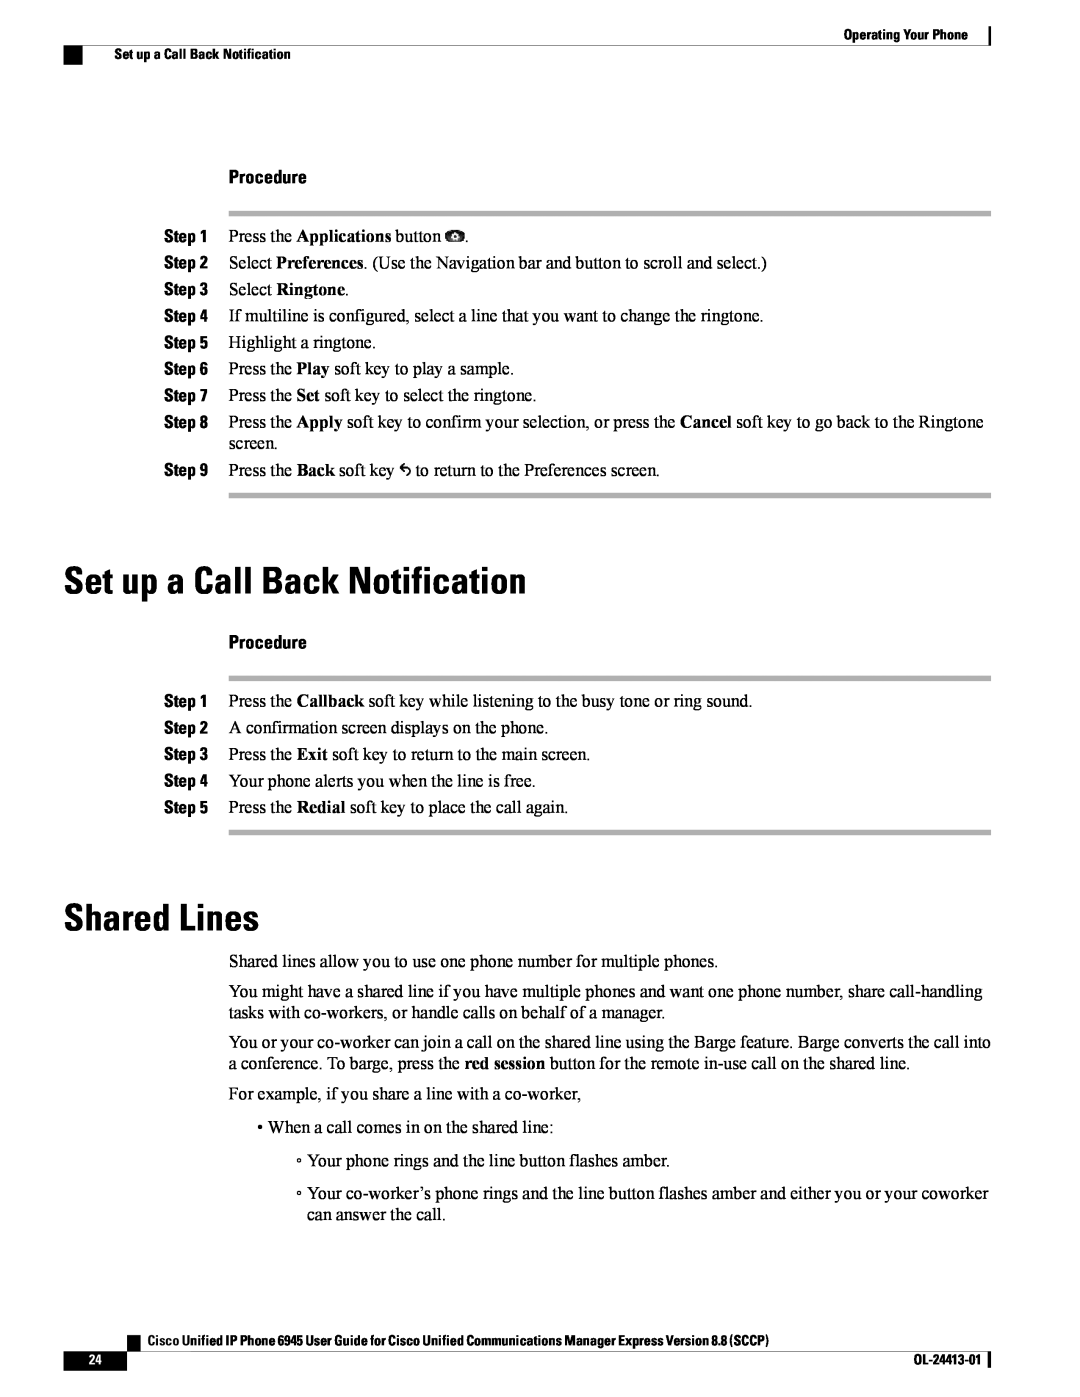 Cisco Systems 6945 manual Set up a Call Back Notification, Shared Lines, Procedure 